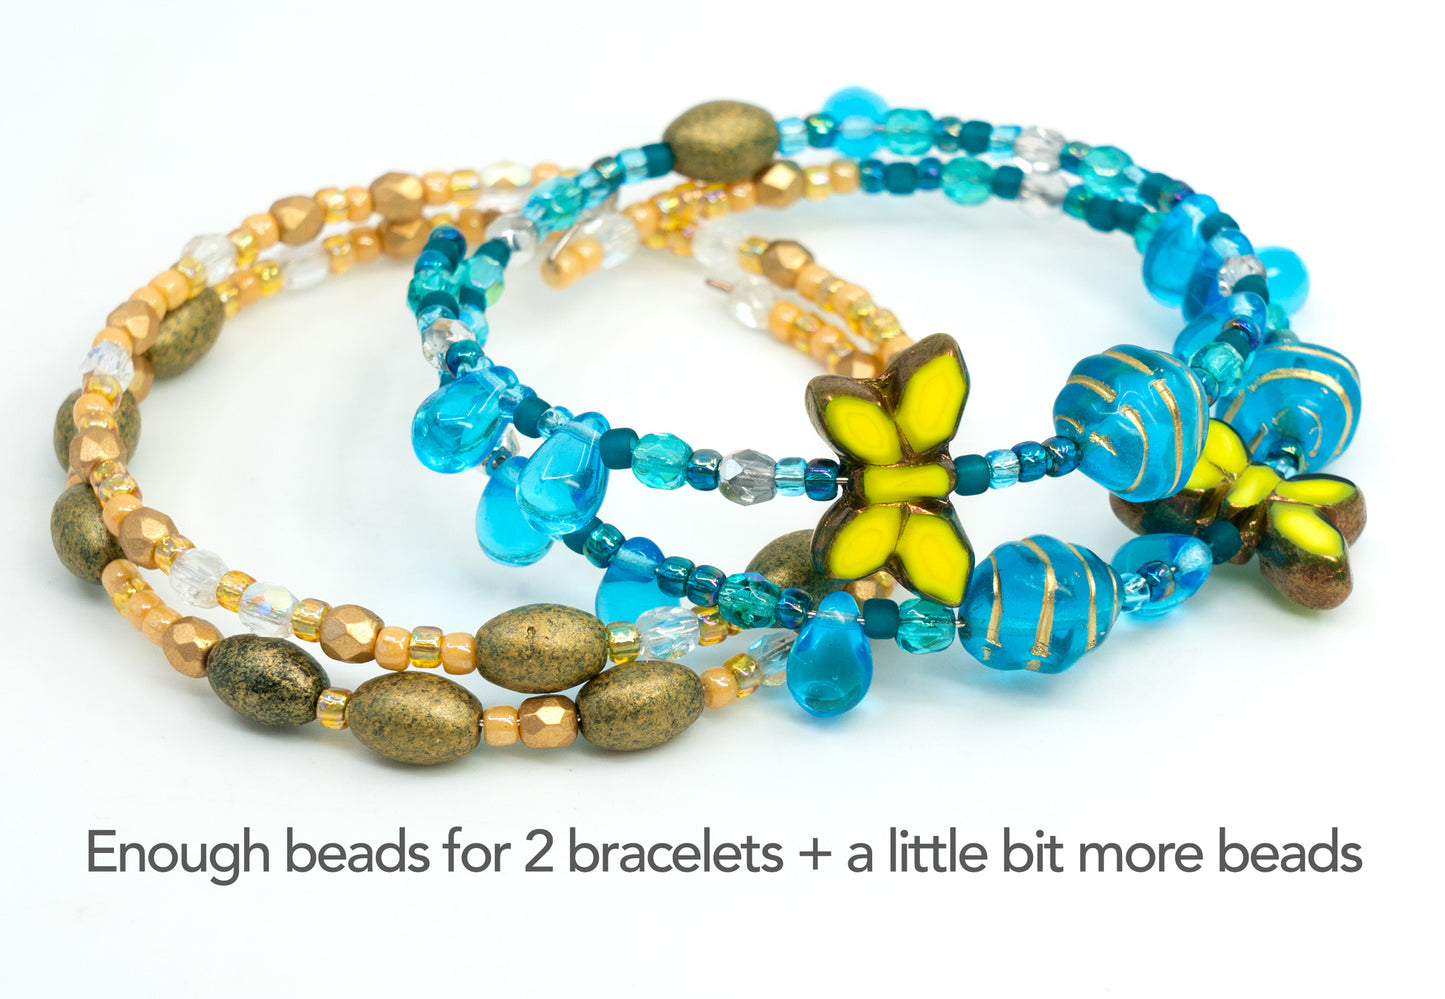 Bracelet making kit with Czech Glass Beads, 2pc Memory wire and crimps for beginners - easy & fast to do (Butterflies Blue Gold)